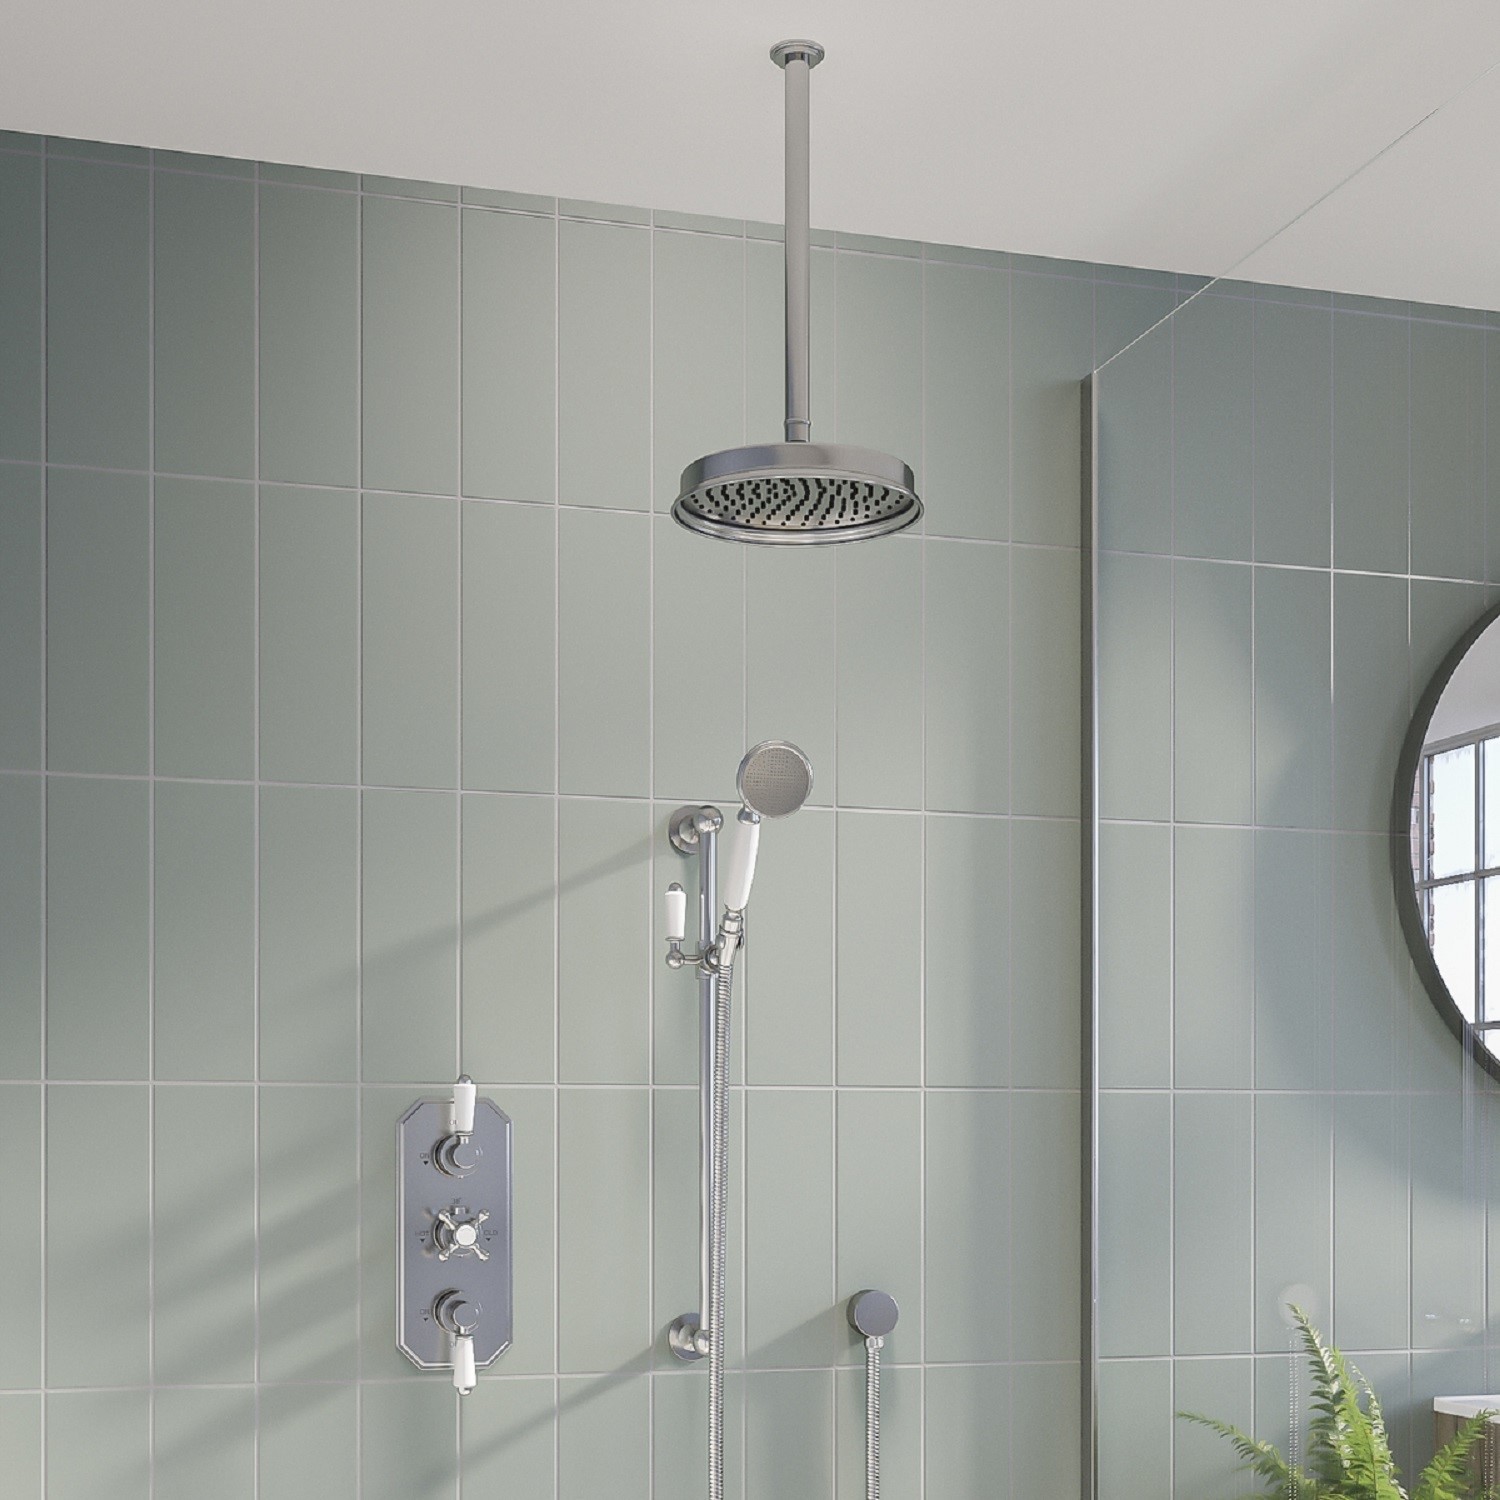 Traditional Concealed Thermostatic Mixer Shower with Ceiling Shower Head Handset & Bath Filler - Cam